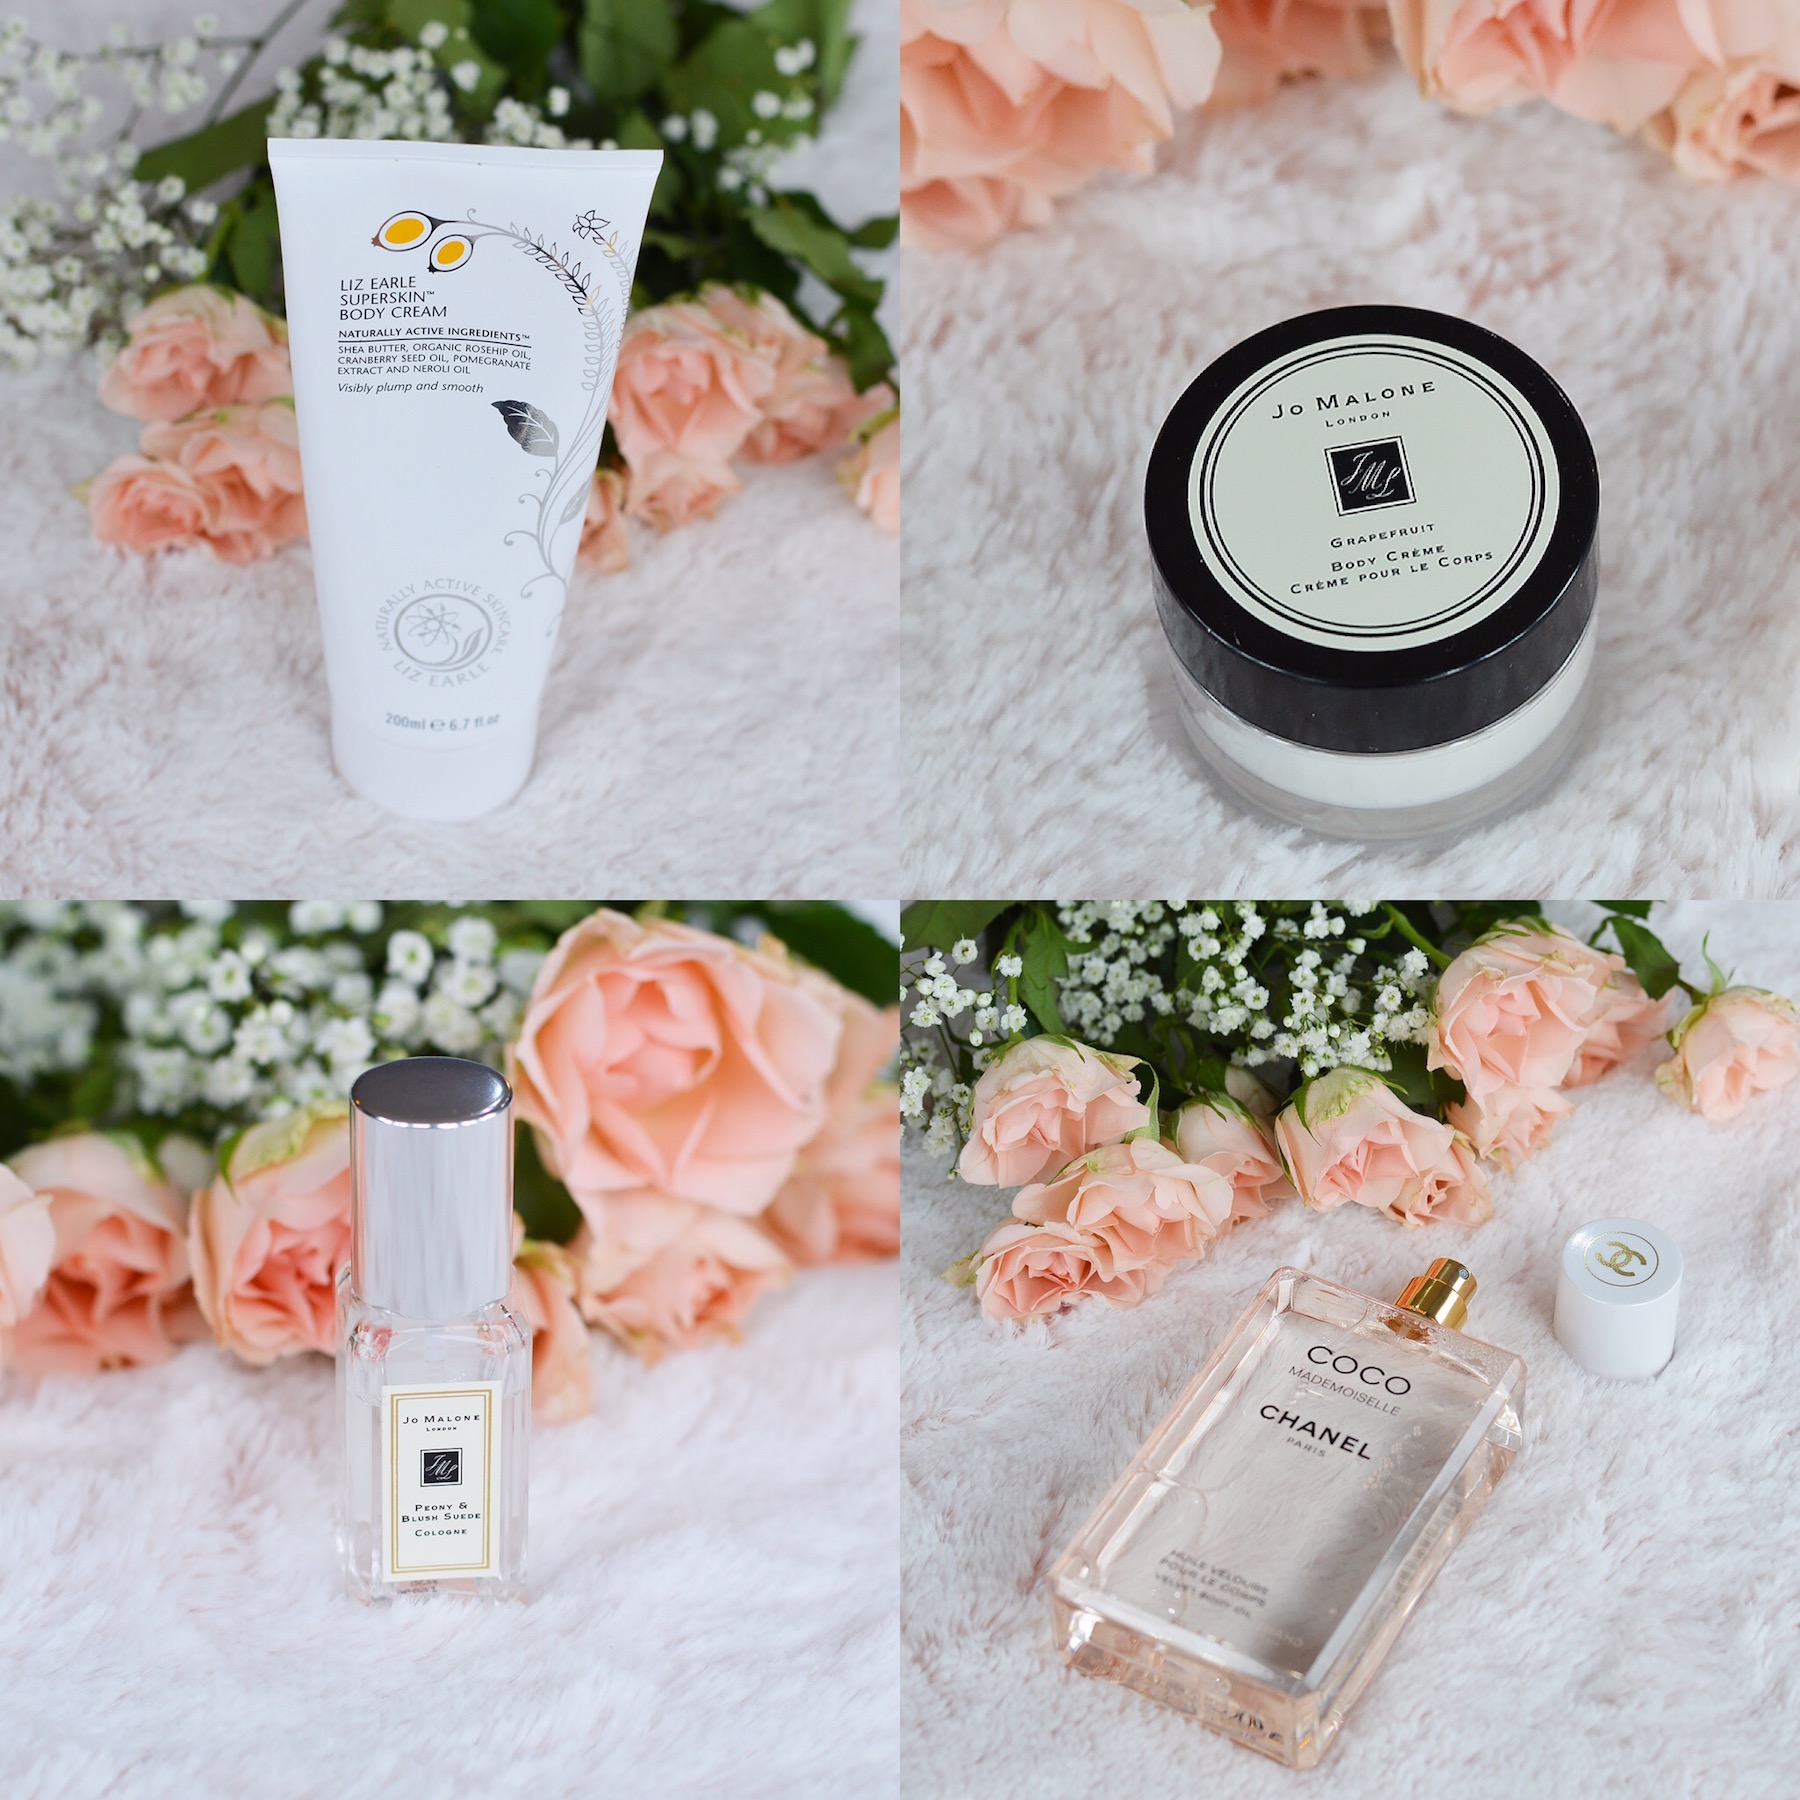 Body Care Product review Chanel, Joe Malone, Liz Earle